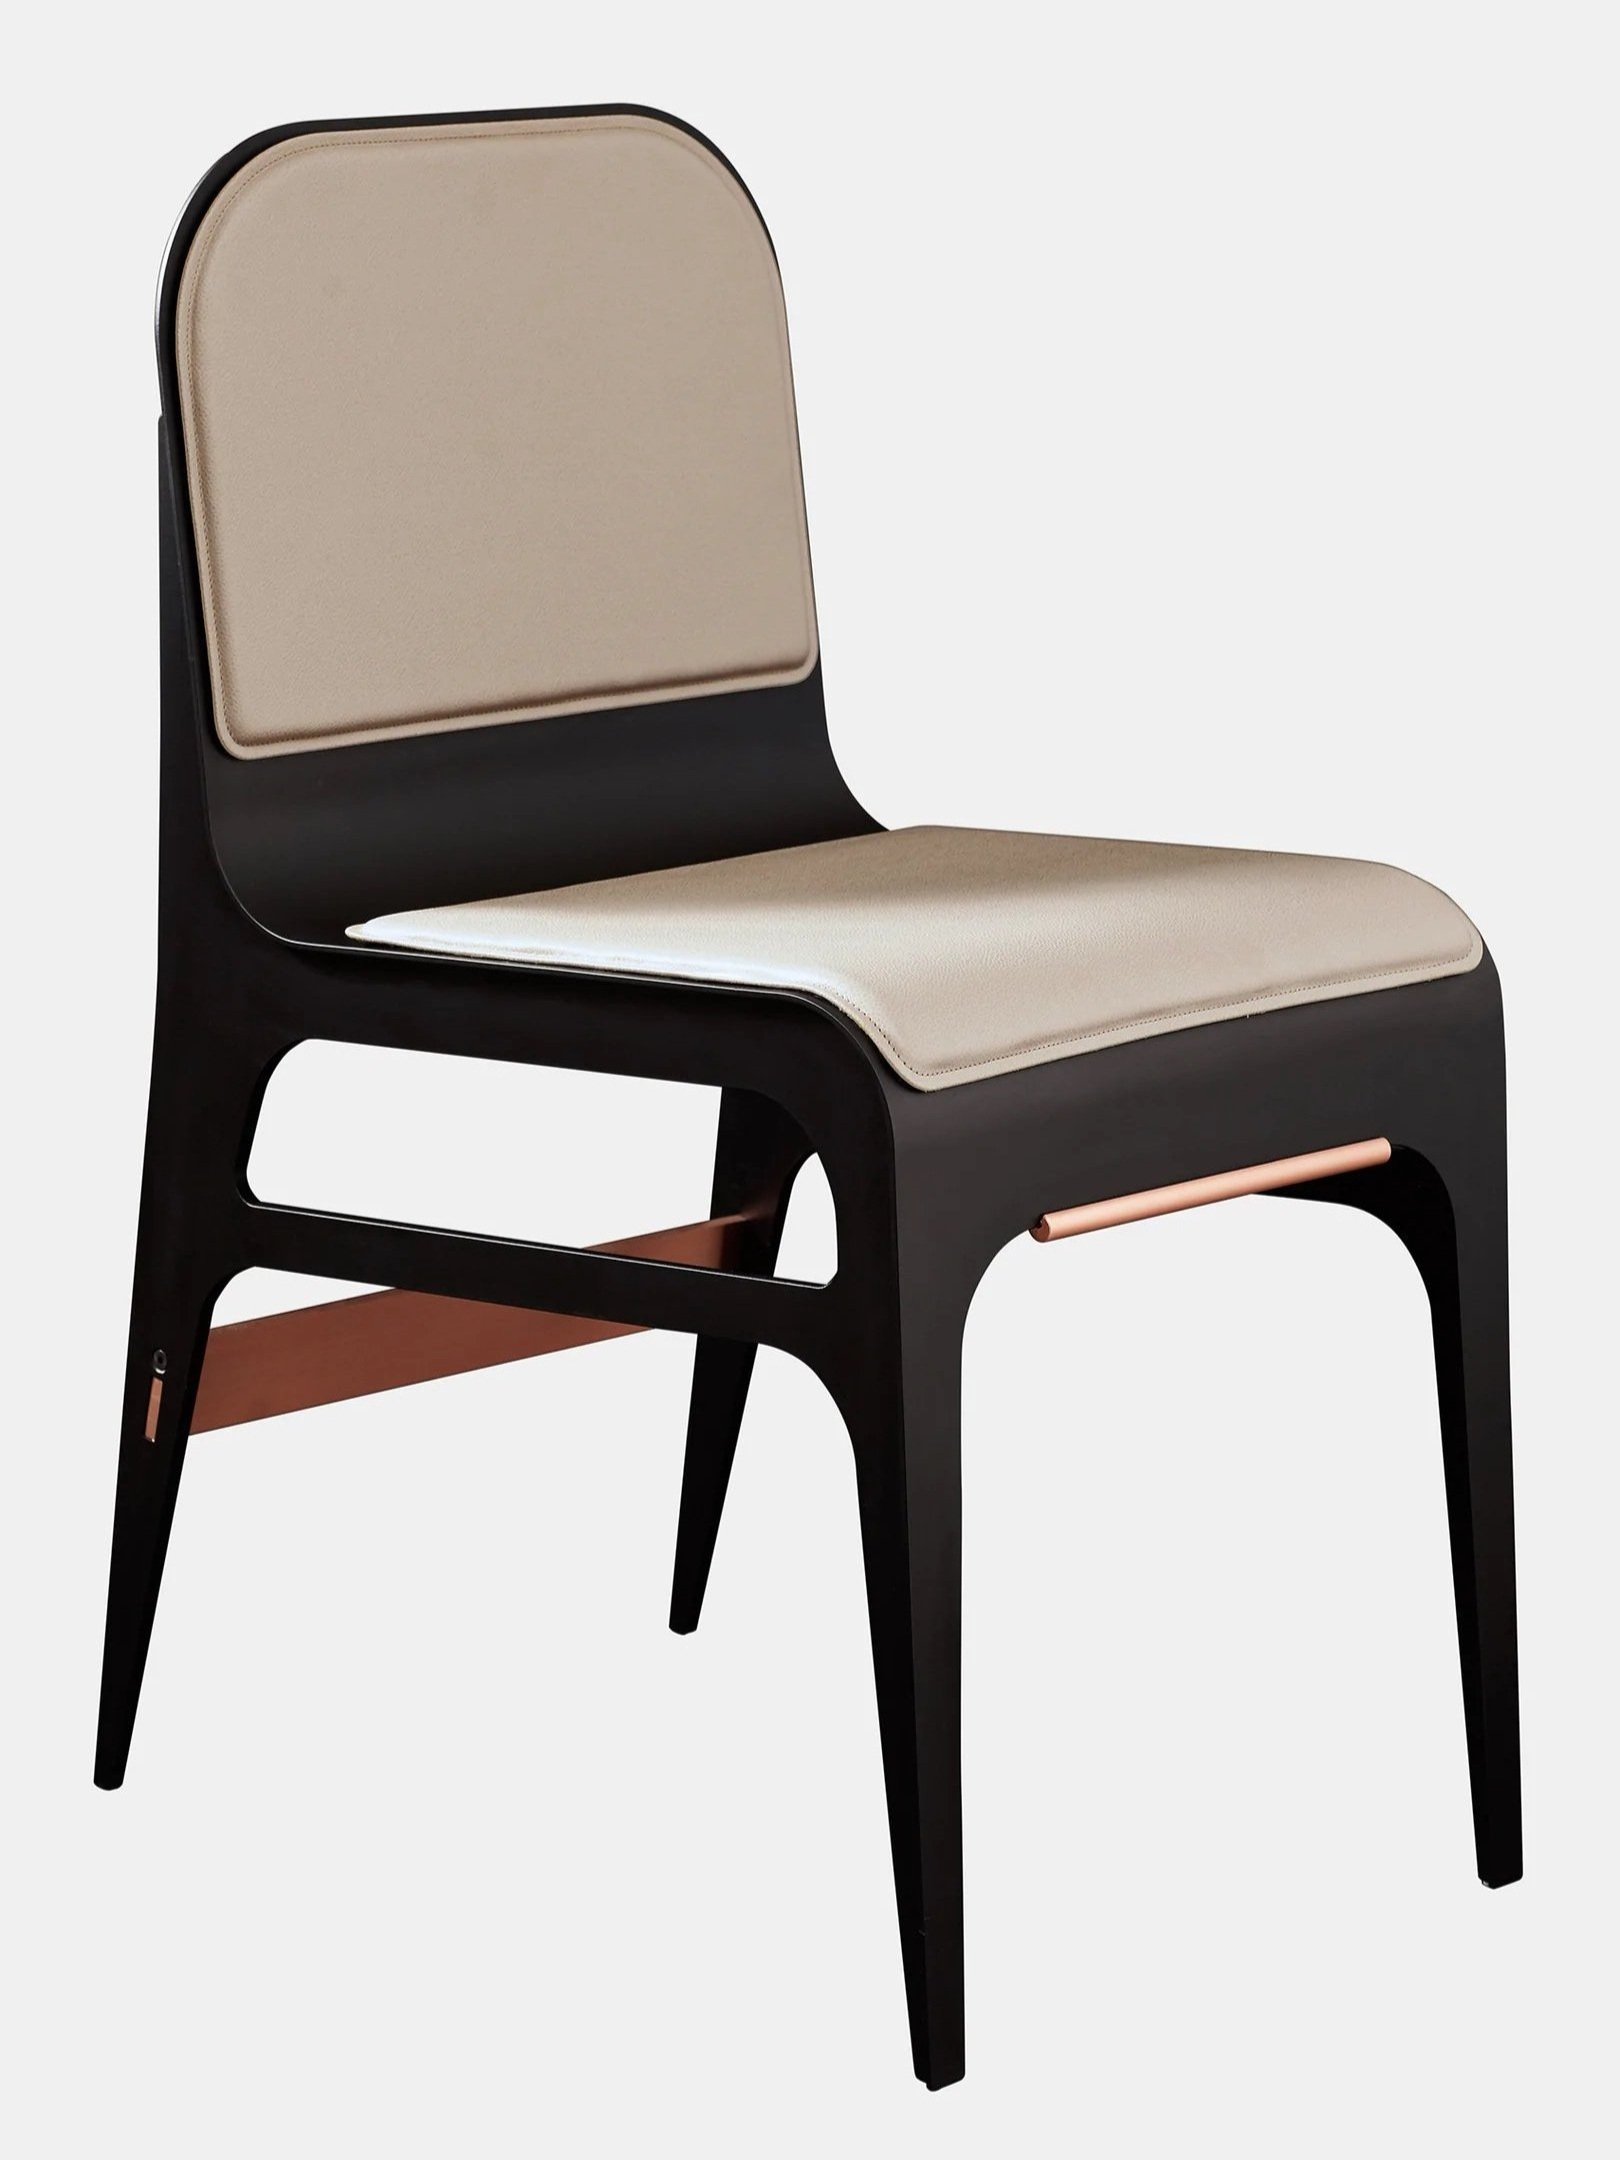 BARDOT CHAIR - SATIN COPPER + NUDE PINK